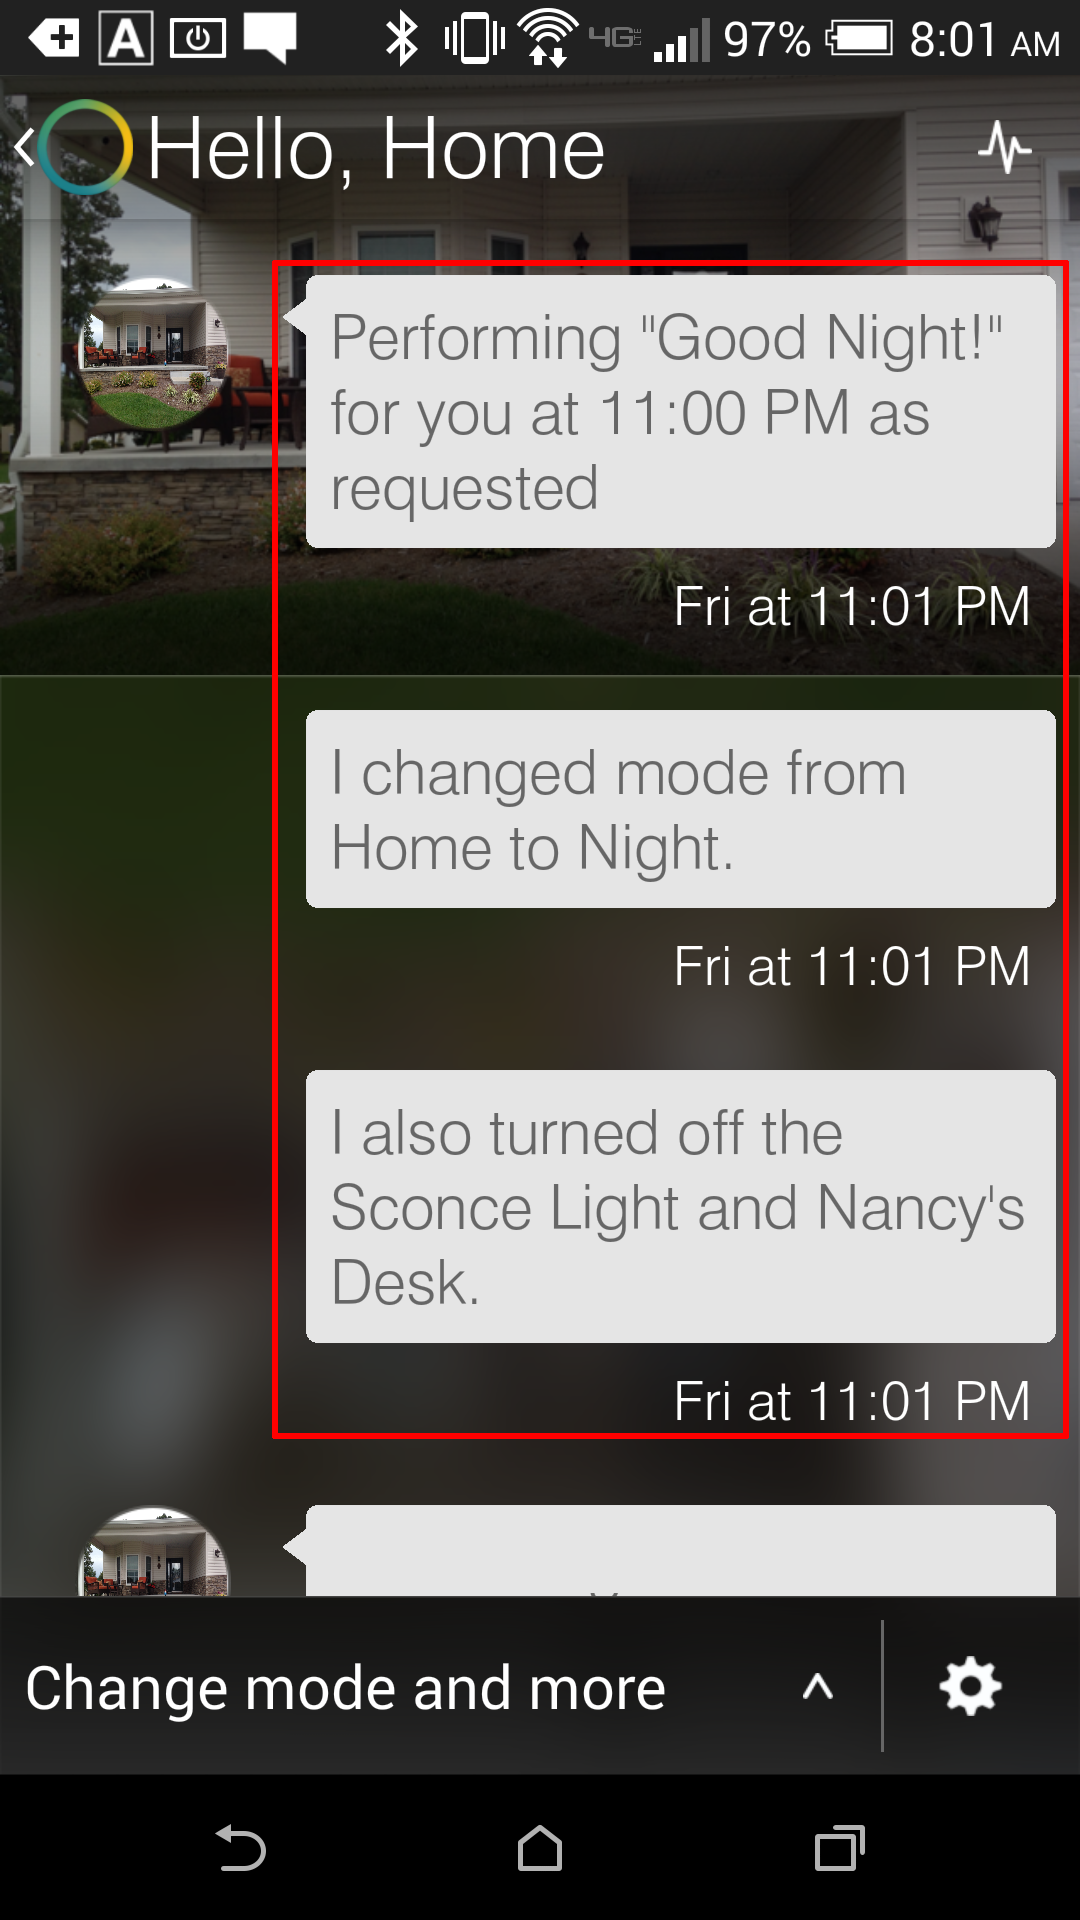 Smartthings App - Activity Feed - This activity shows that at 11:01 pm, the "Good Night" feature fired, setting the home hub to "Night" mode.  It also sent Off commands to various lighting.